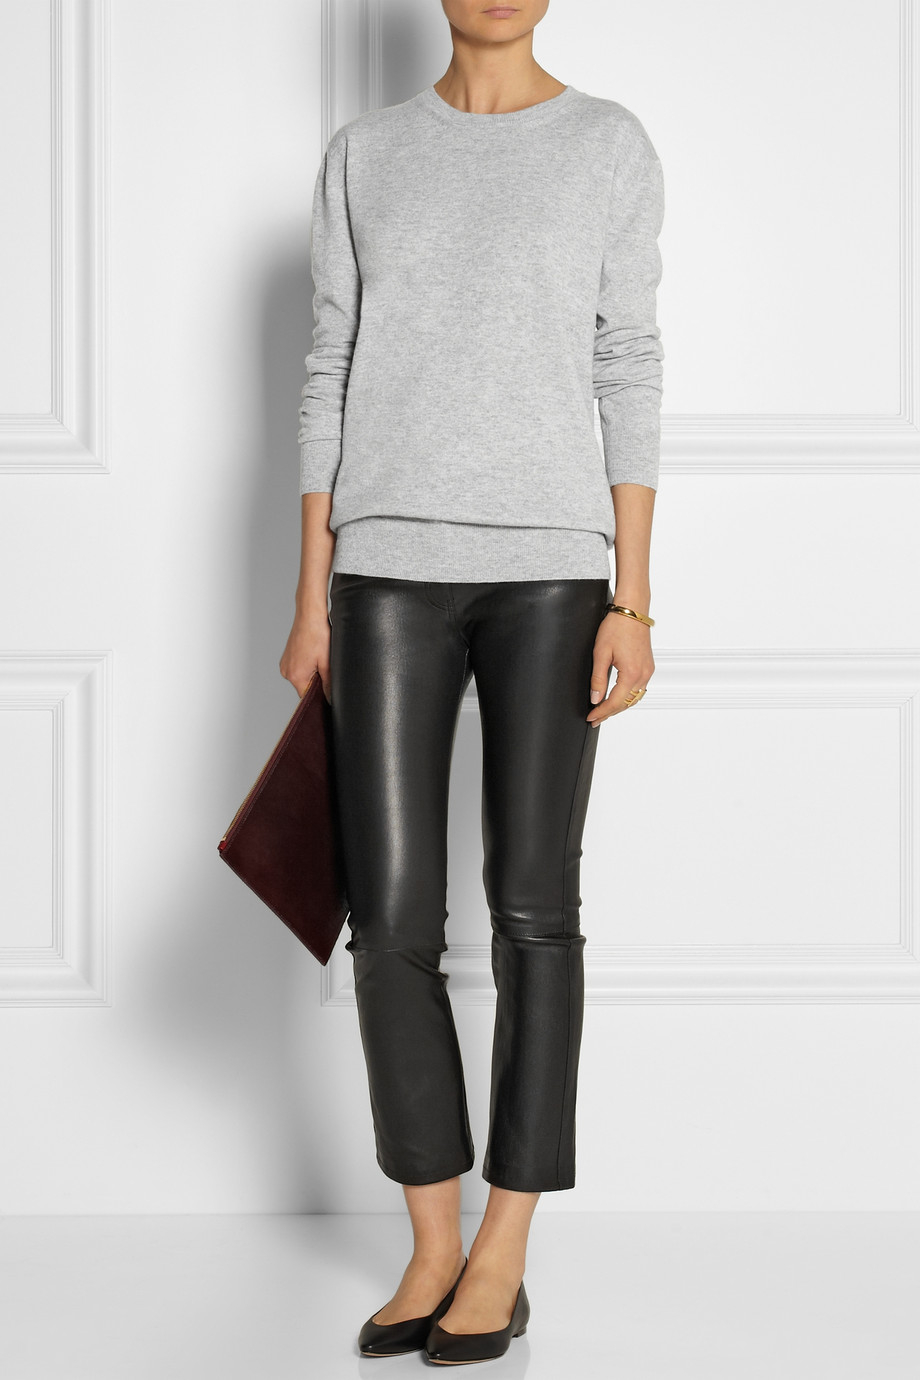 Lyst - The Row Landly Cropped Stretch-Leather Straight-Leg Pants in Black